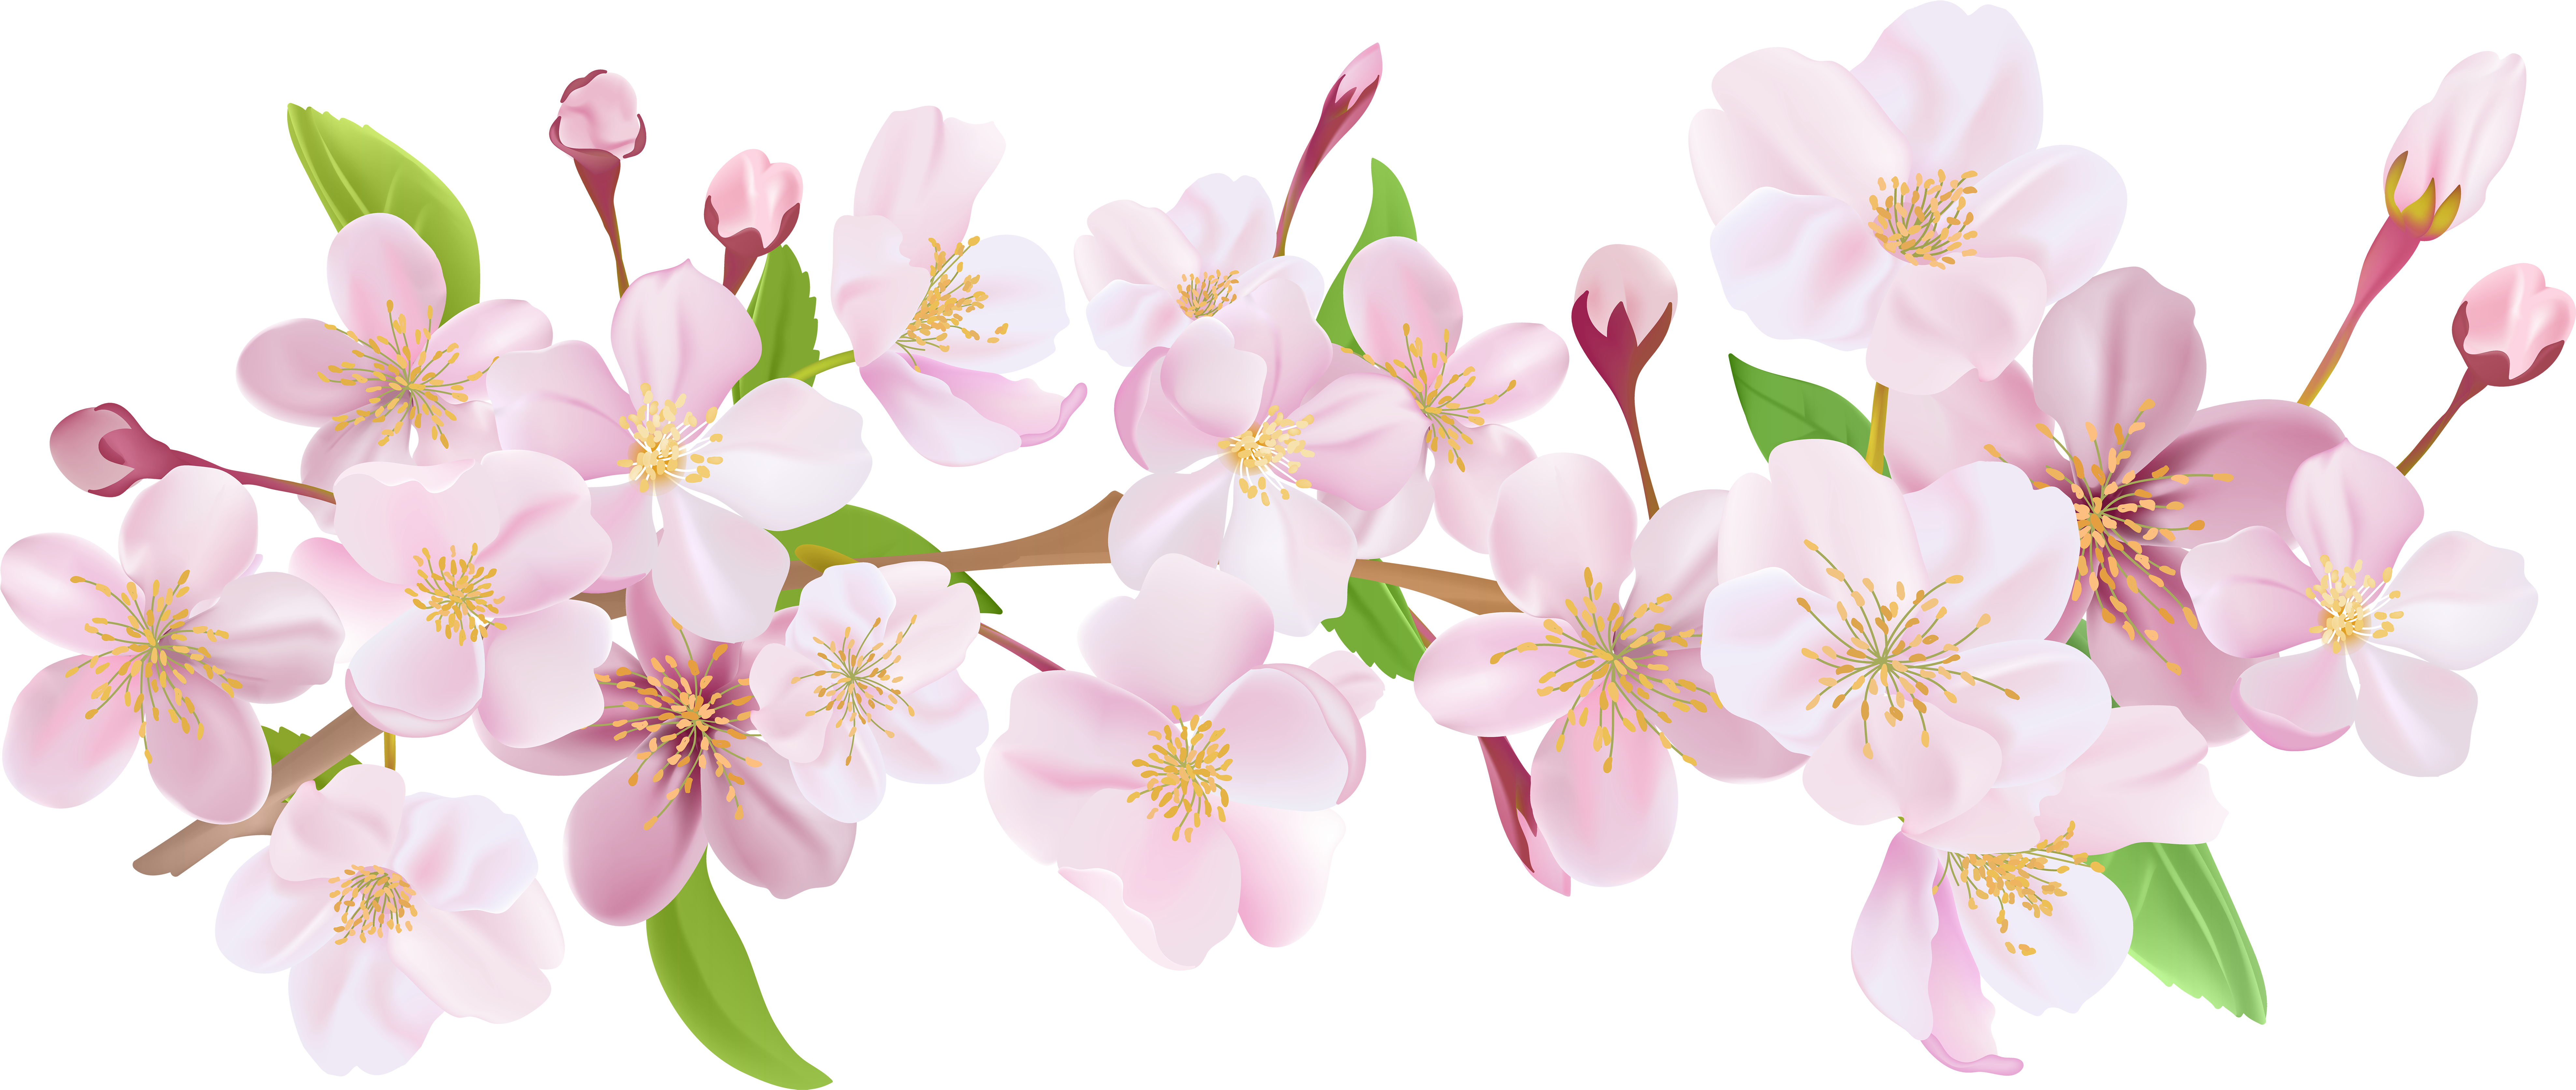 Download Cherry Blossom Flower Png Picture Download Cherry Blossom